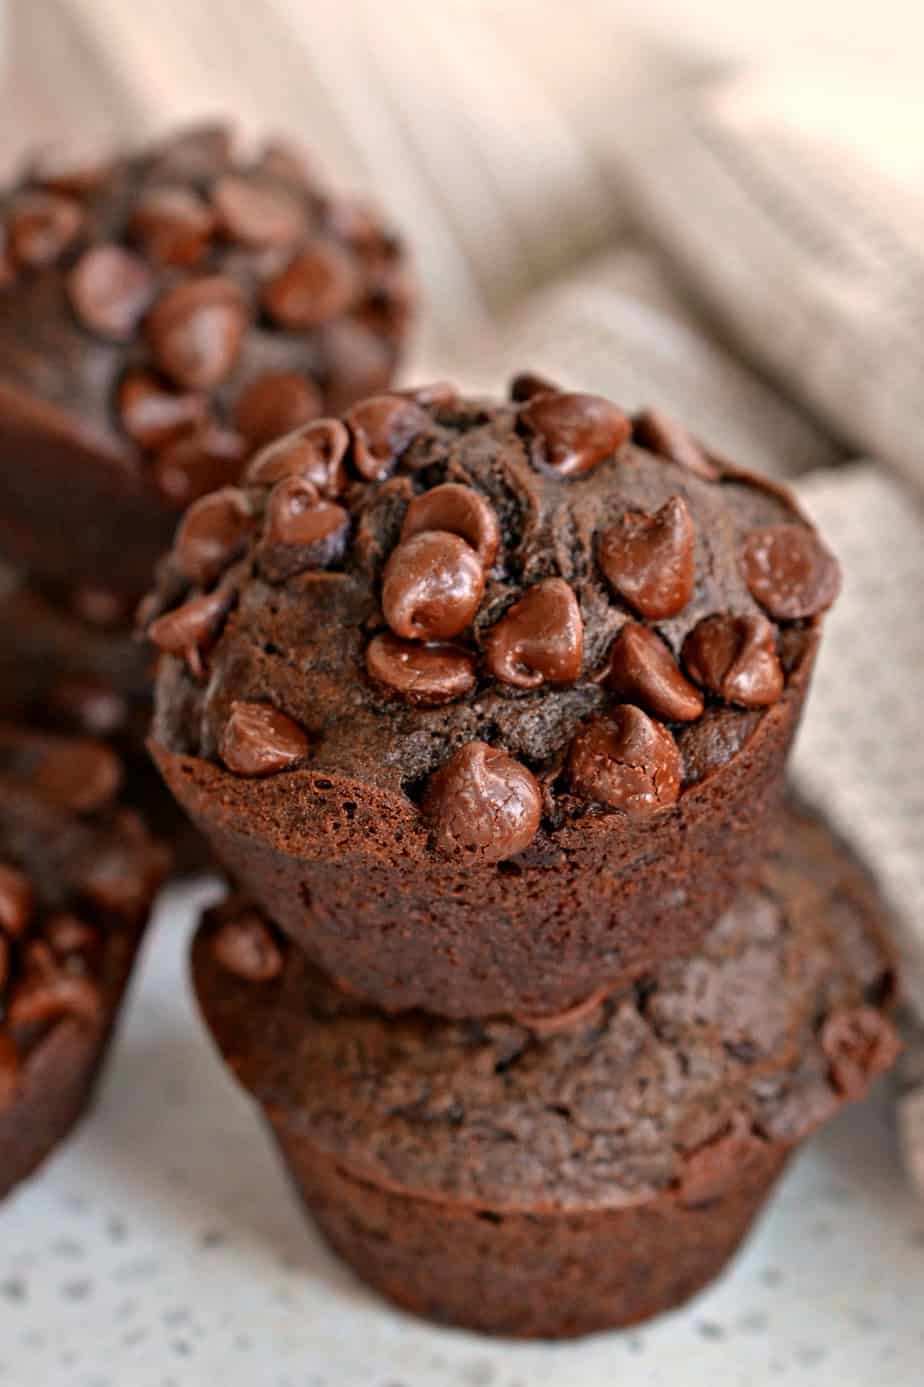 Chocolate Chocolate Chip Muffins are a Chocolate lovers dream